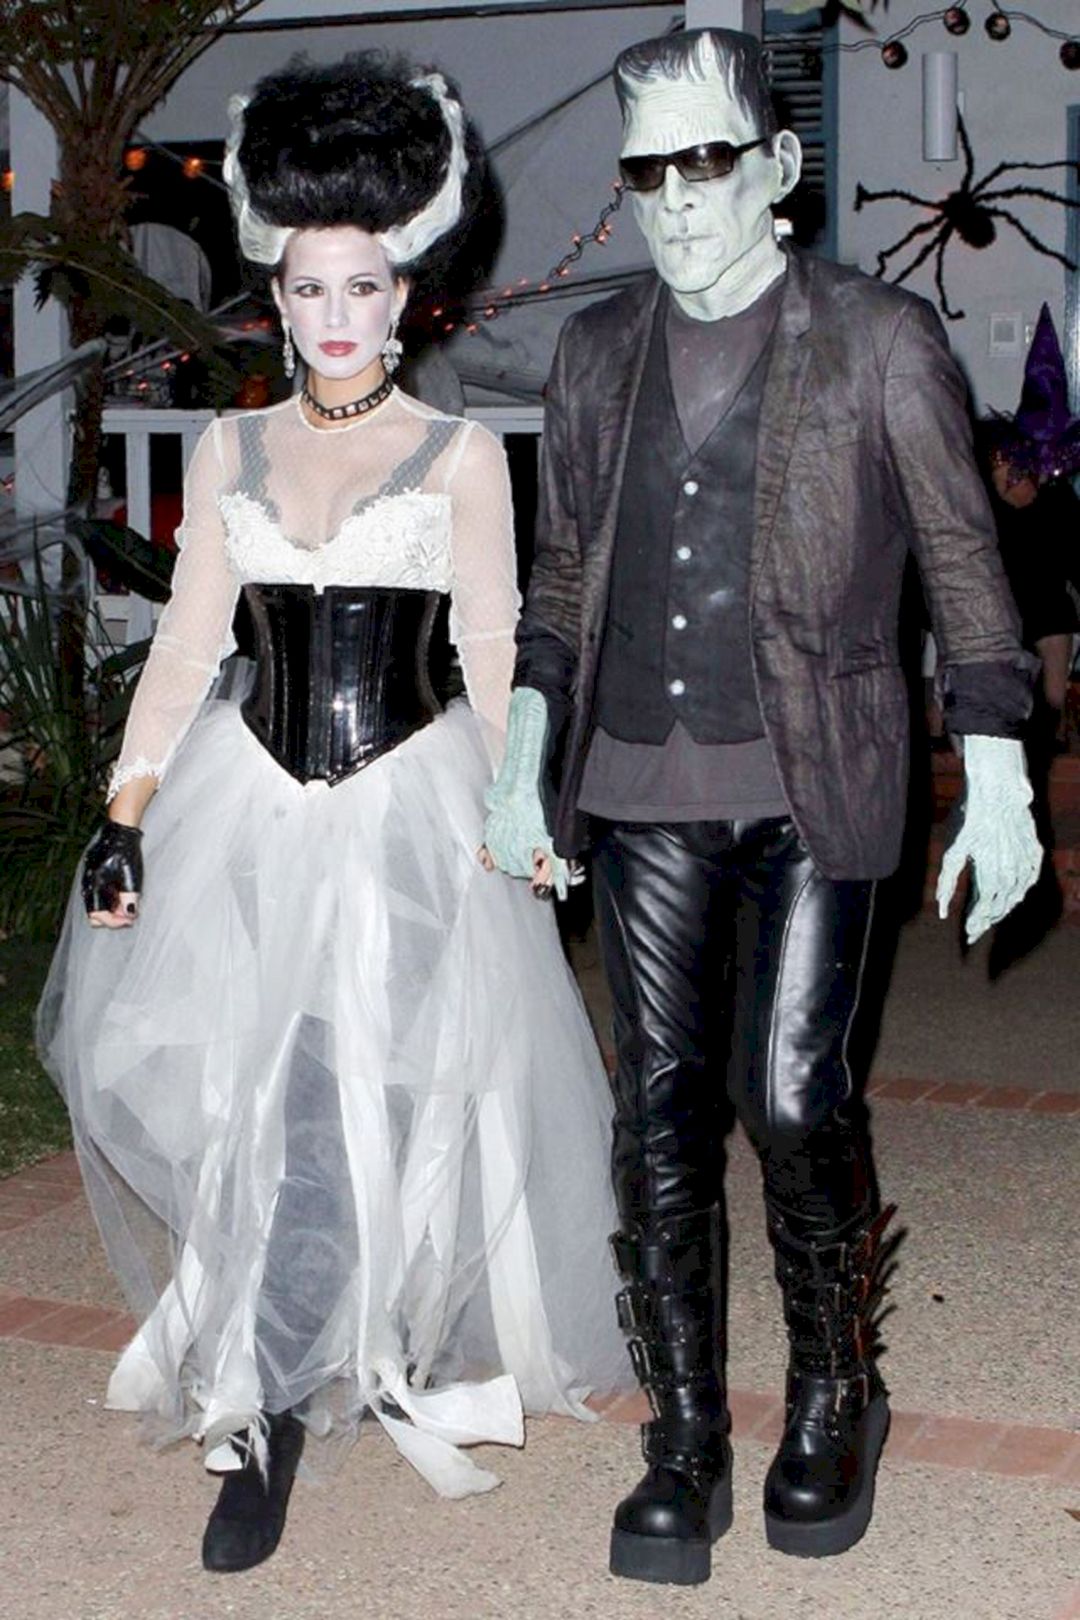 Alluring halloween costume for couples from blurmark